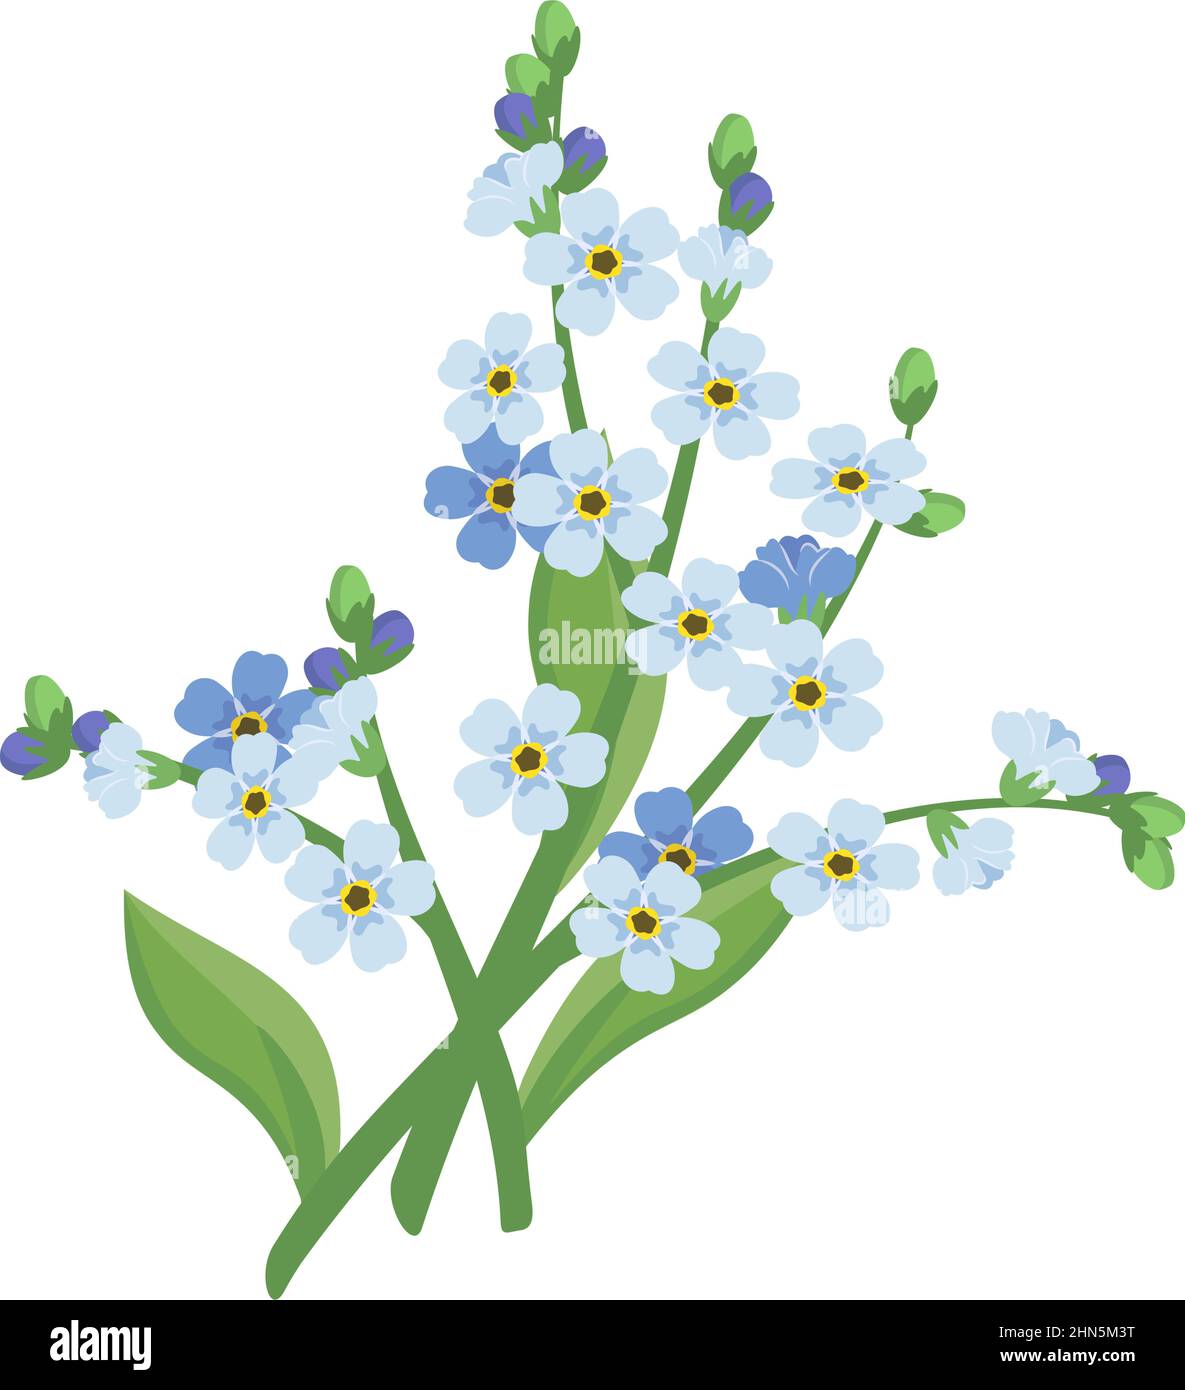 Small blue forget me not flowers with stems and leaves. Field flowering plants. Romantic decoration for wedding and design. Vector flat illustration Stock Vector